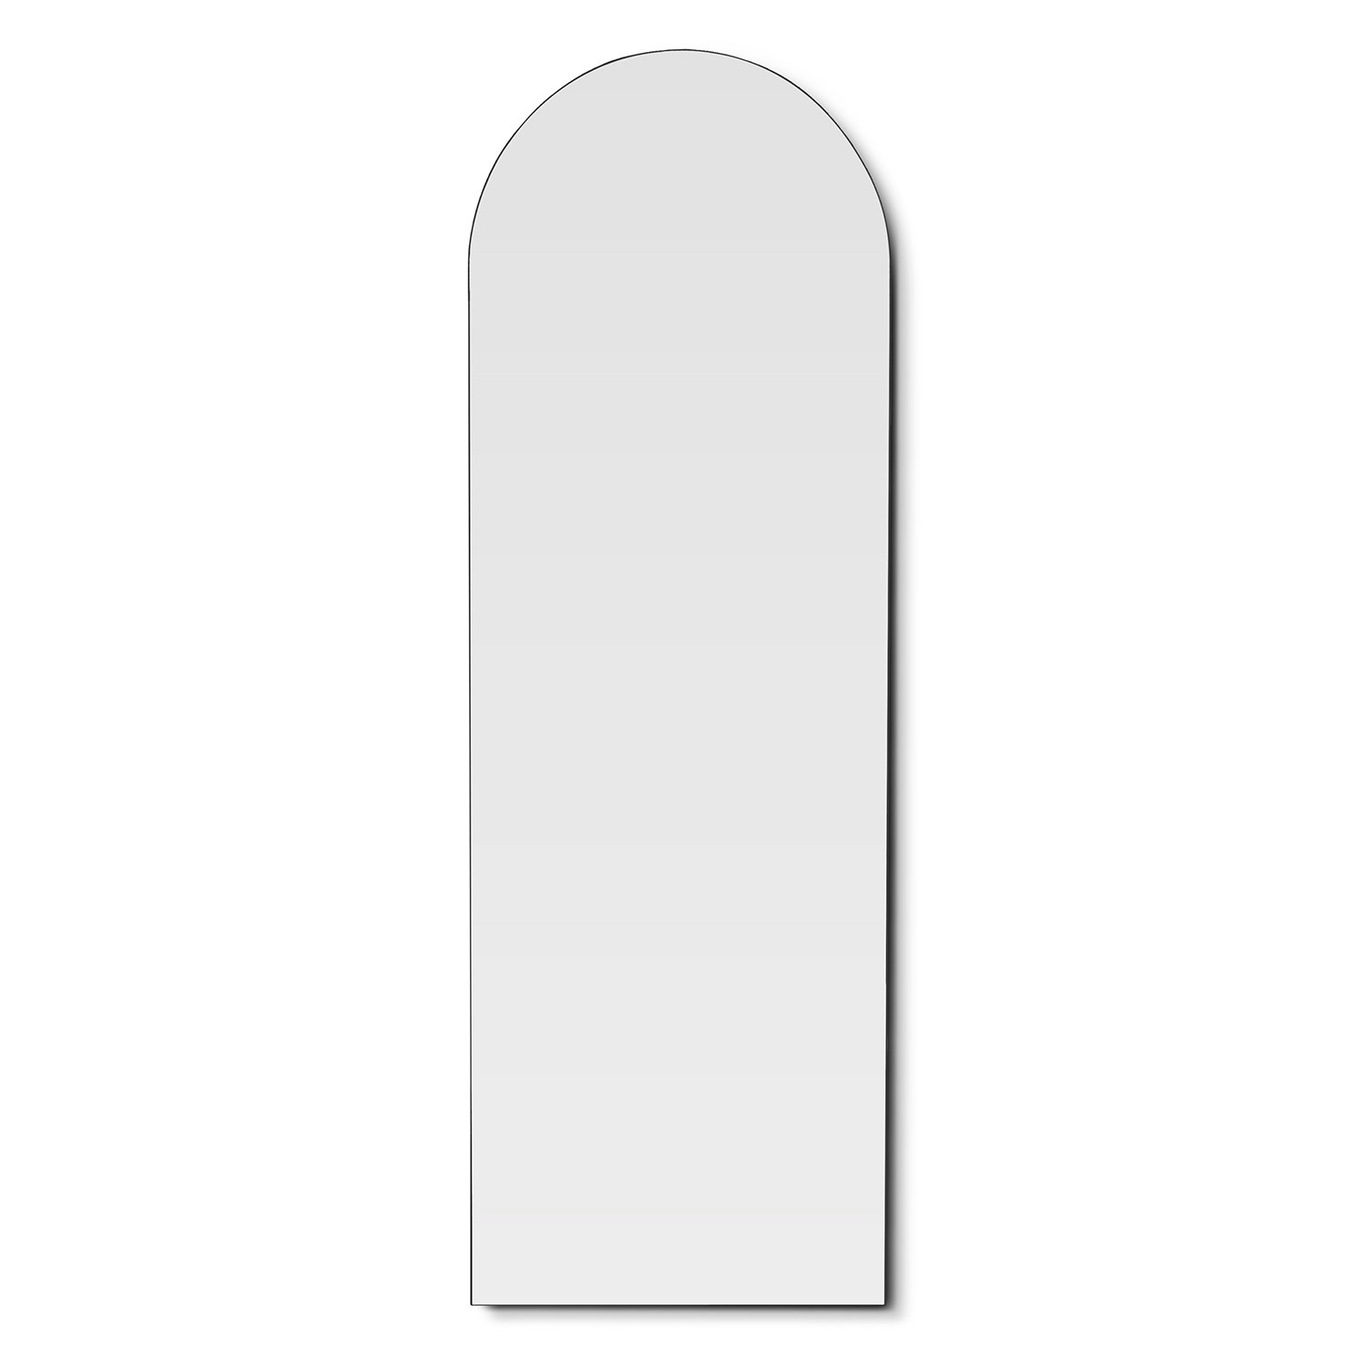 https://royaldesign.de/image/7/friends-founders-arc-mirror-small-clear-0?w=800&quality=80